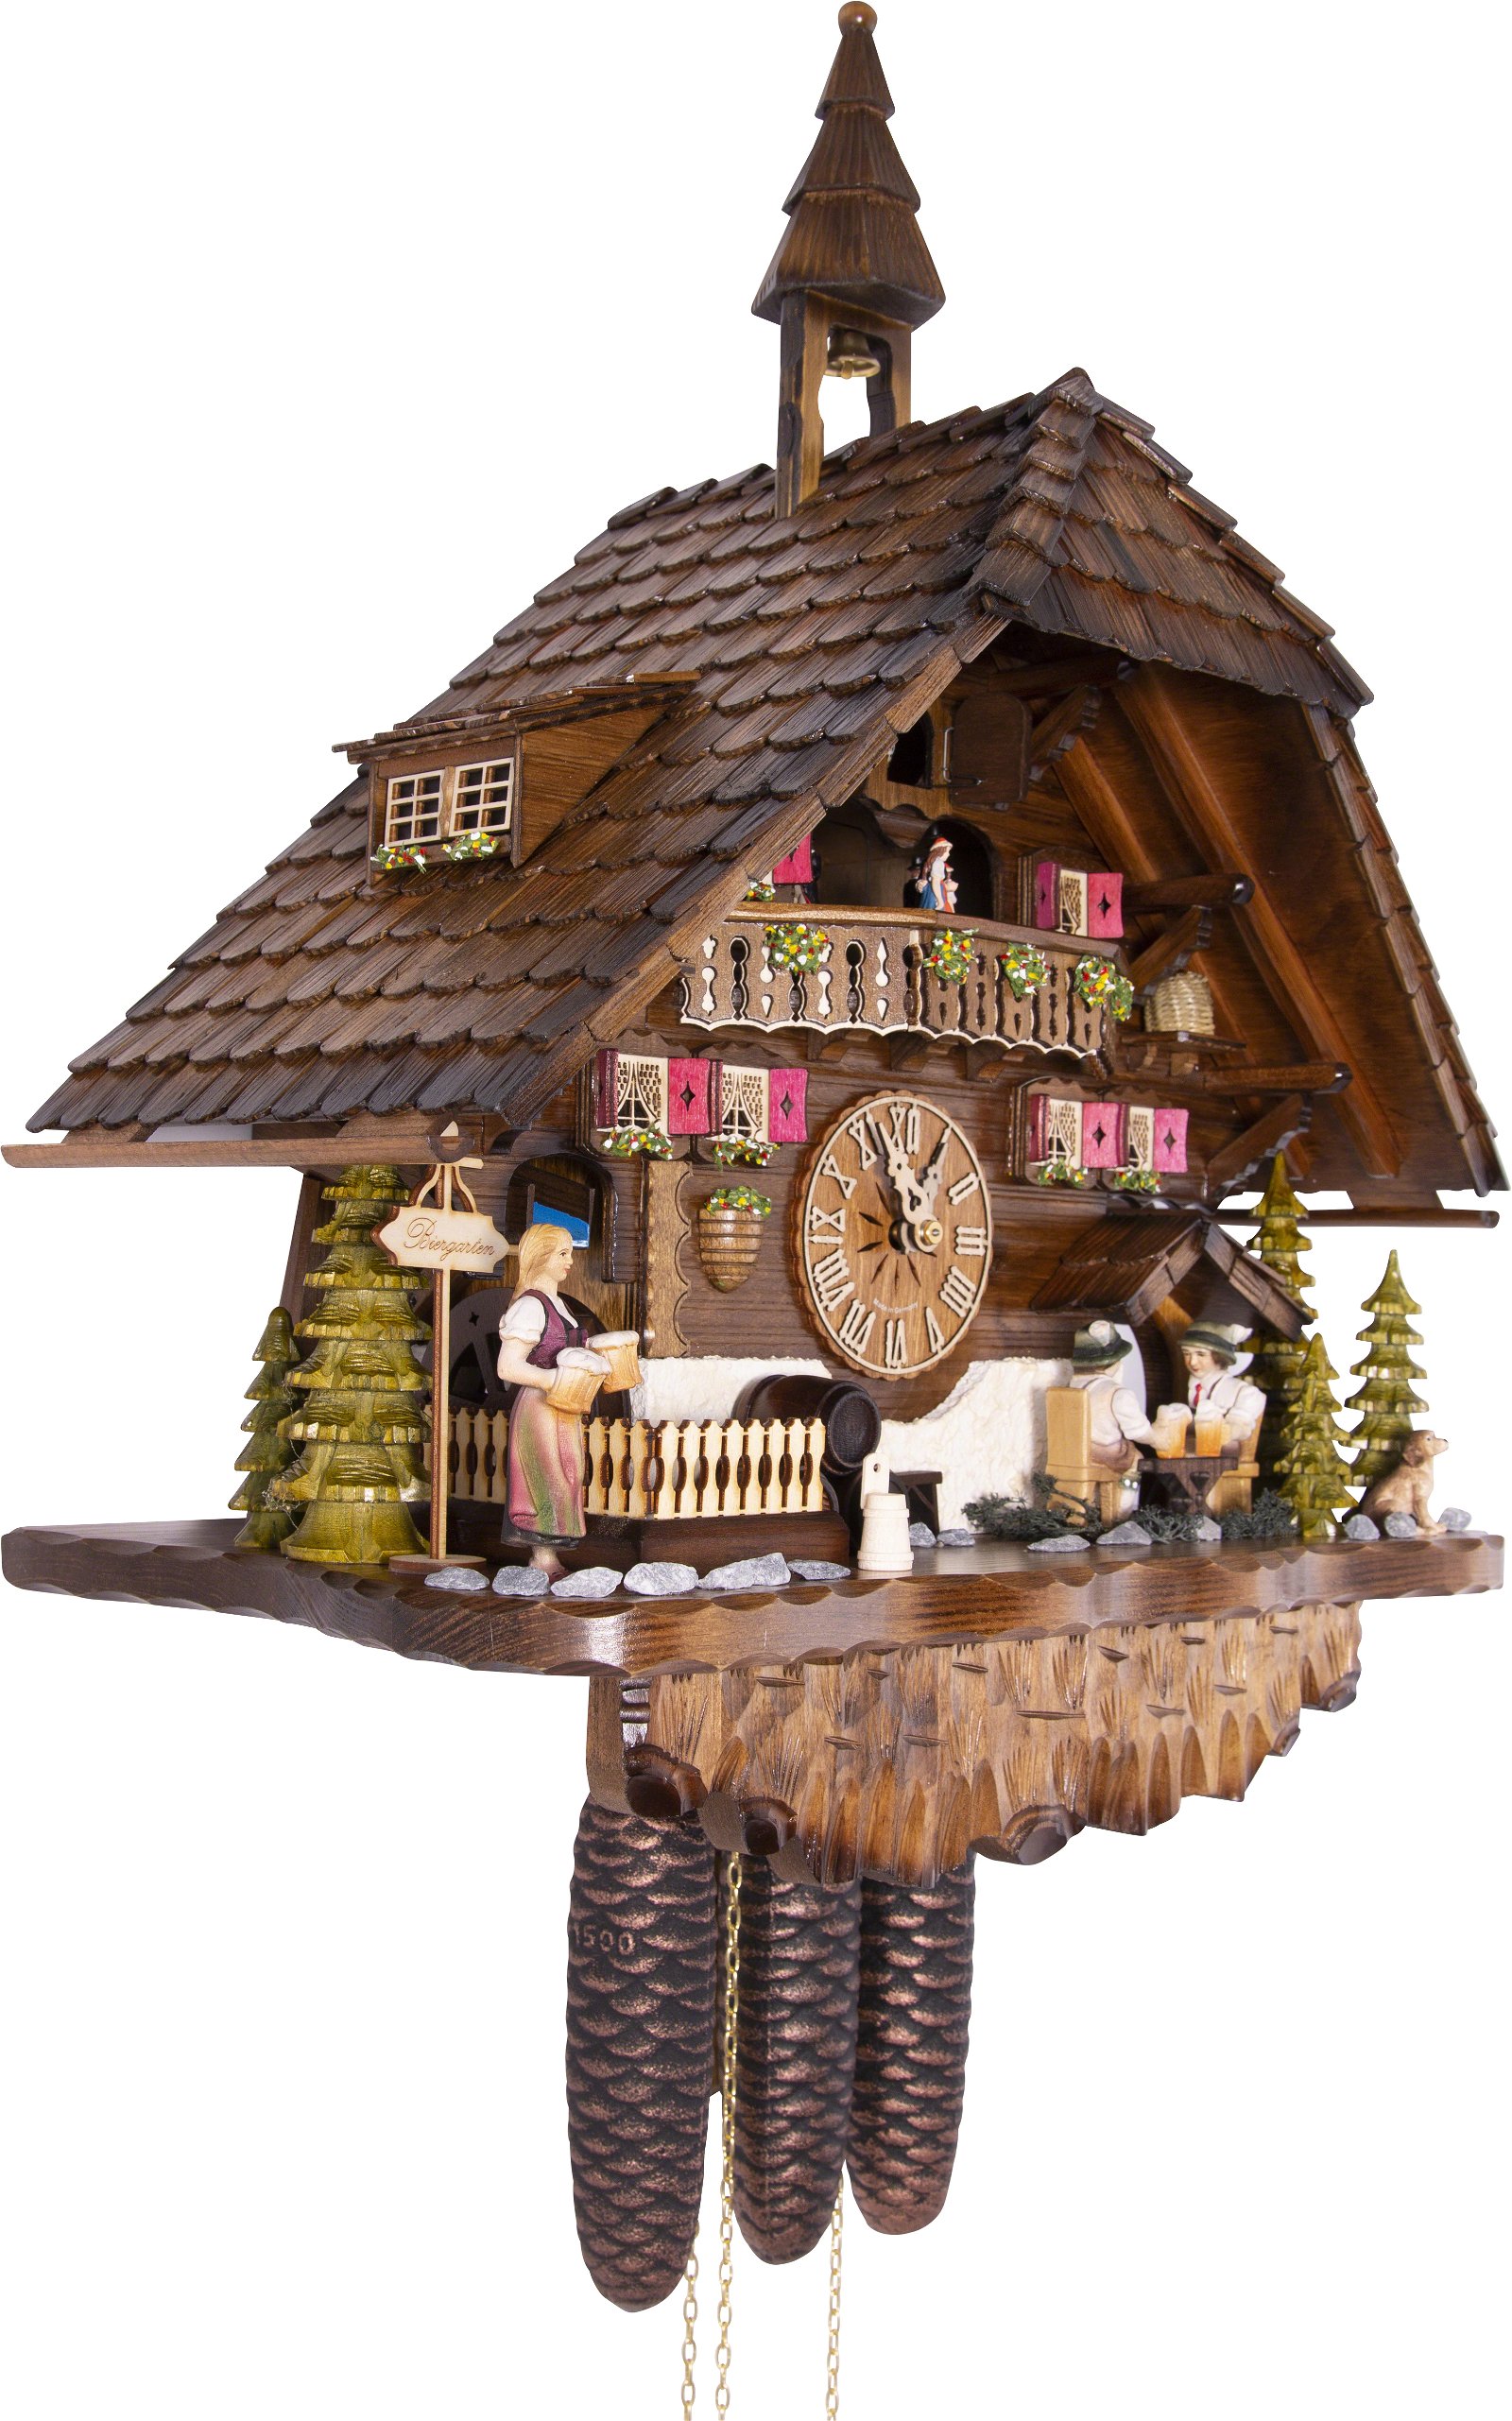 Cuckoo Clock 8-day-movement Chalet-Style 60cm by Hekas